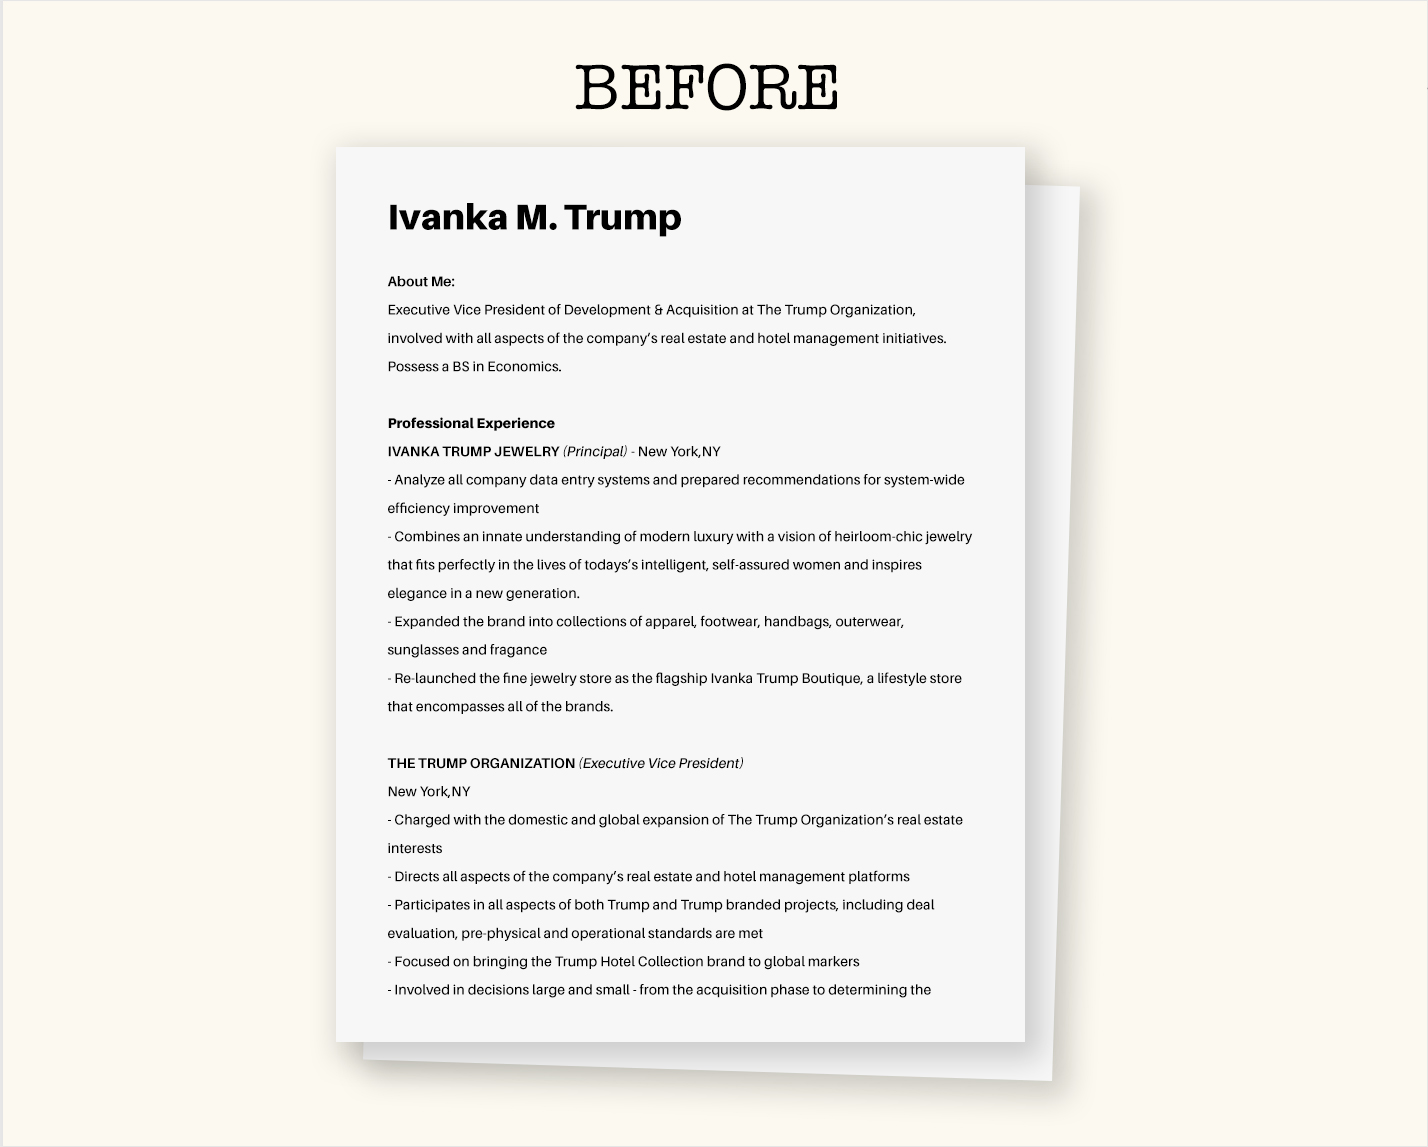 how to create your own visual resume